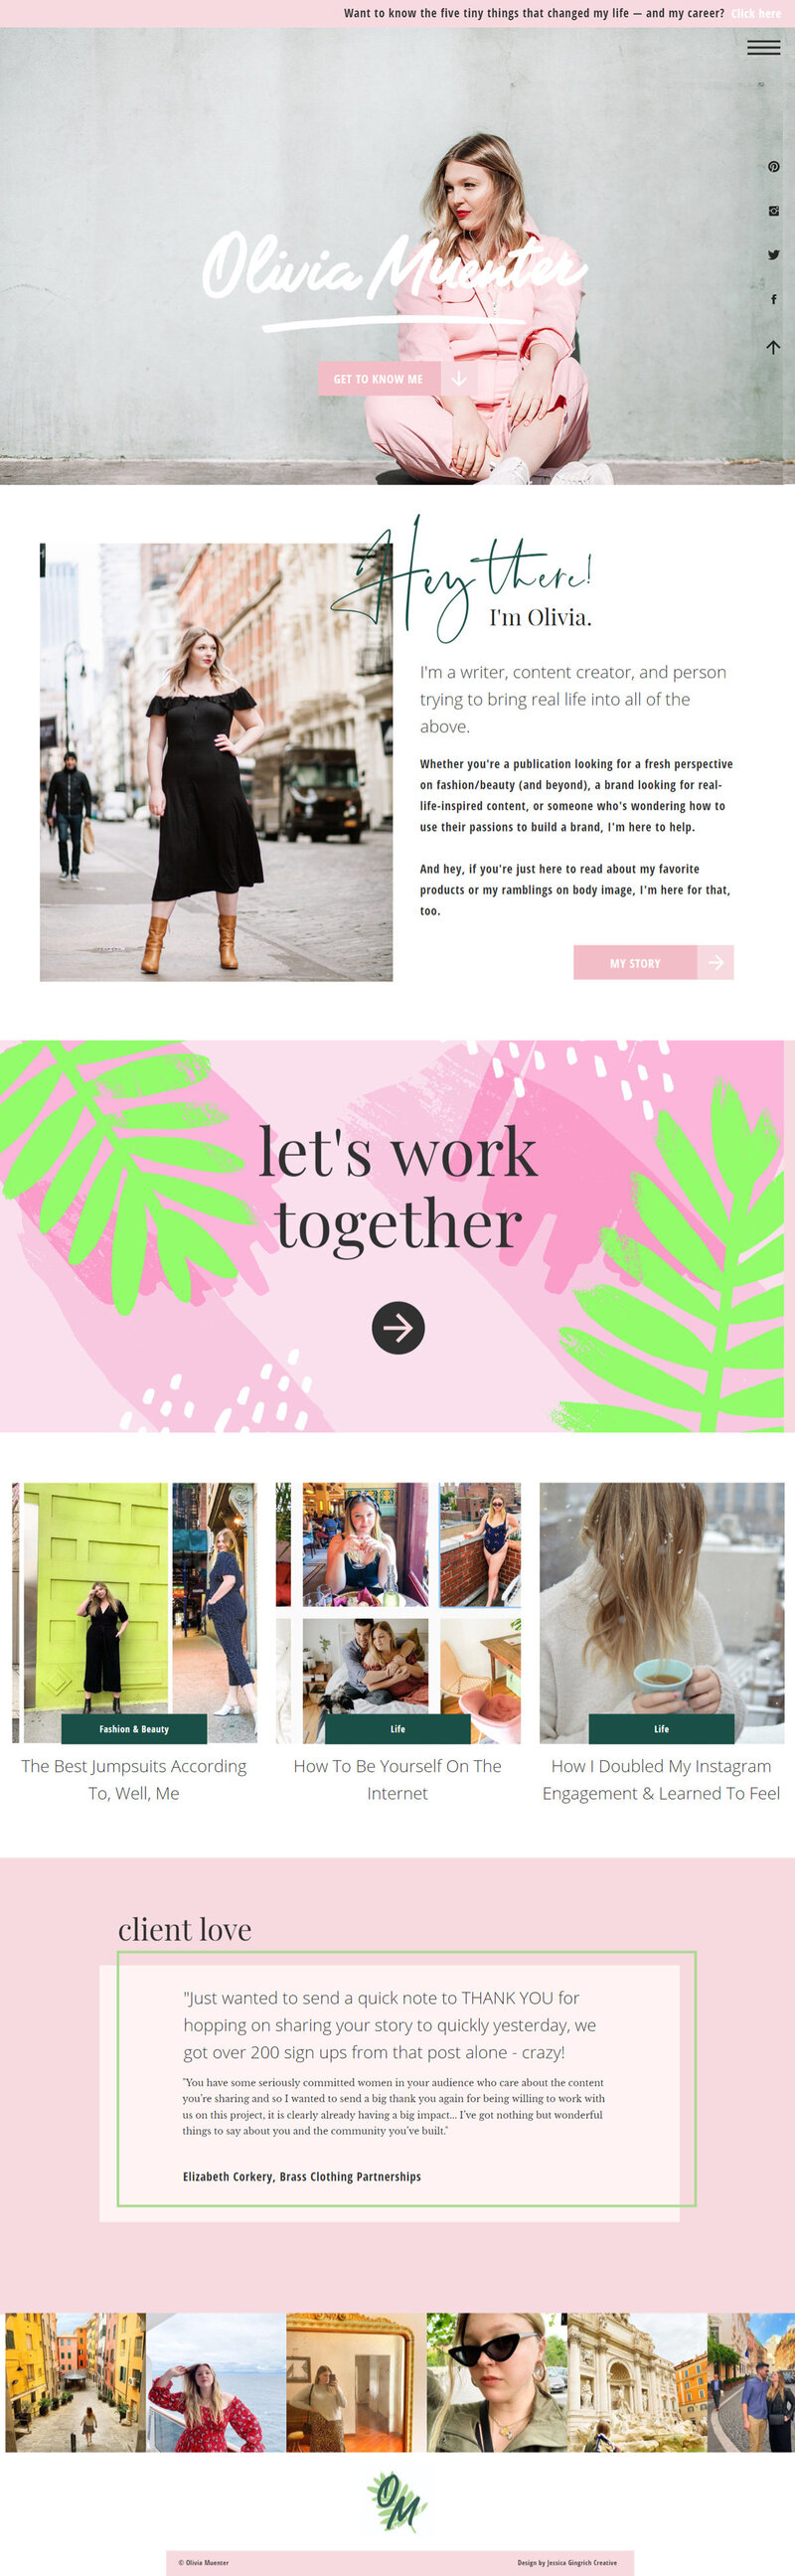 Showit Website Templates By Jessica Gingrich For Female Entrepreneurs